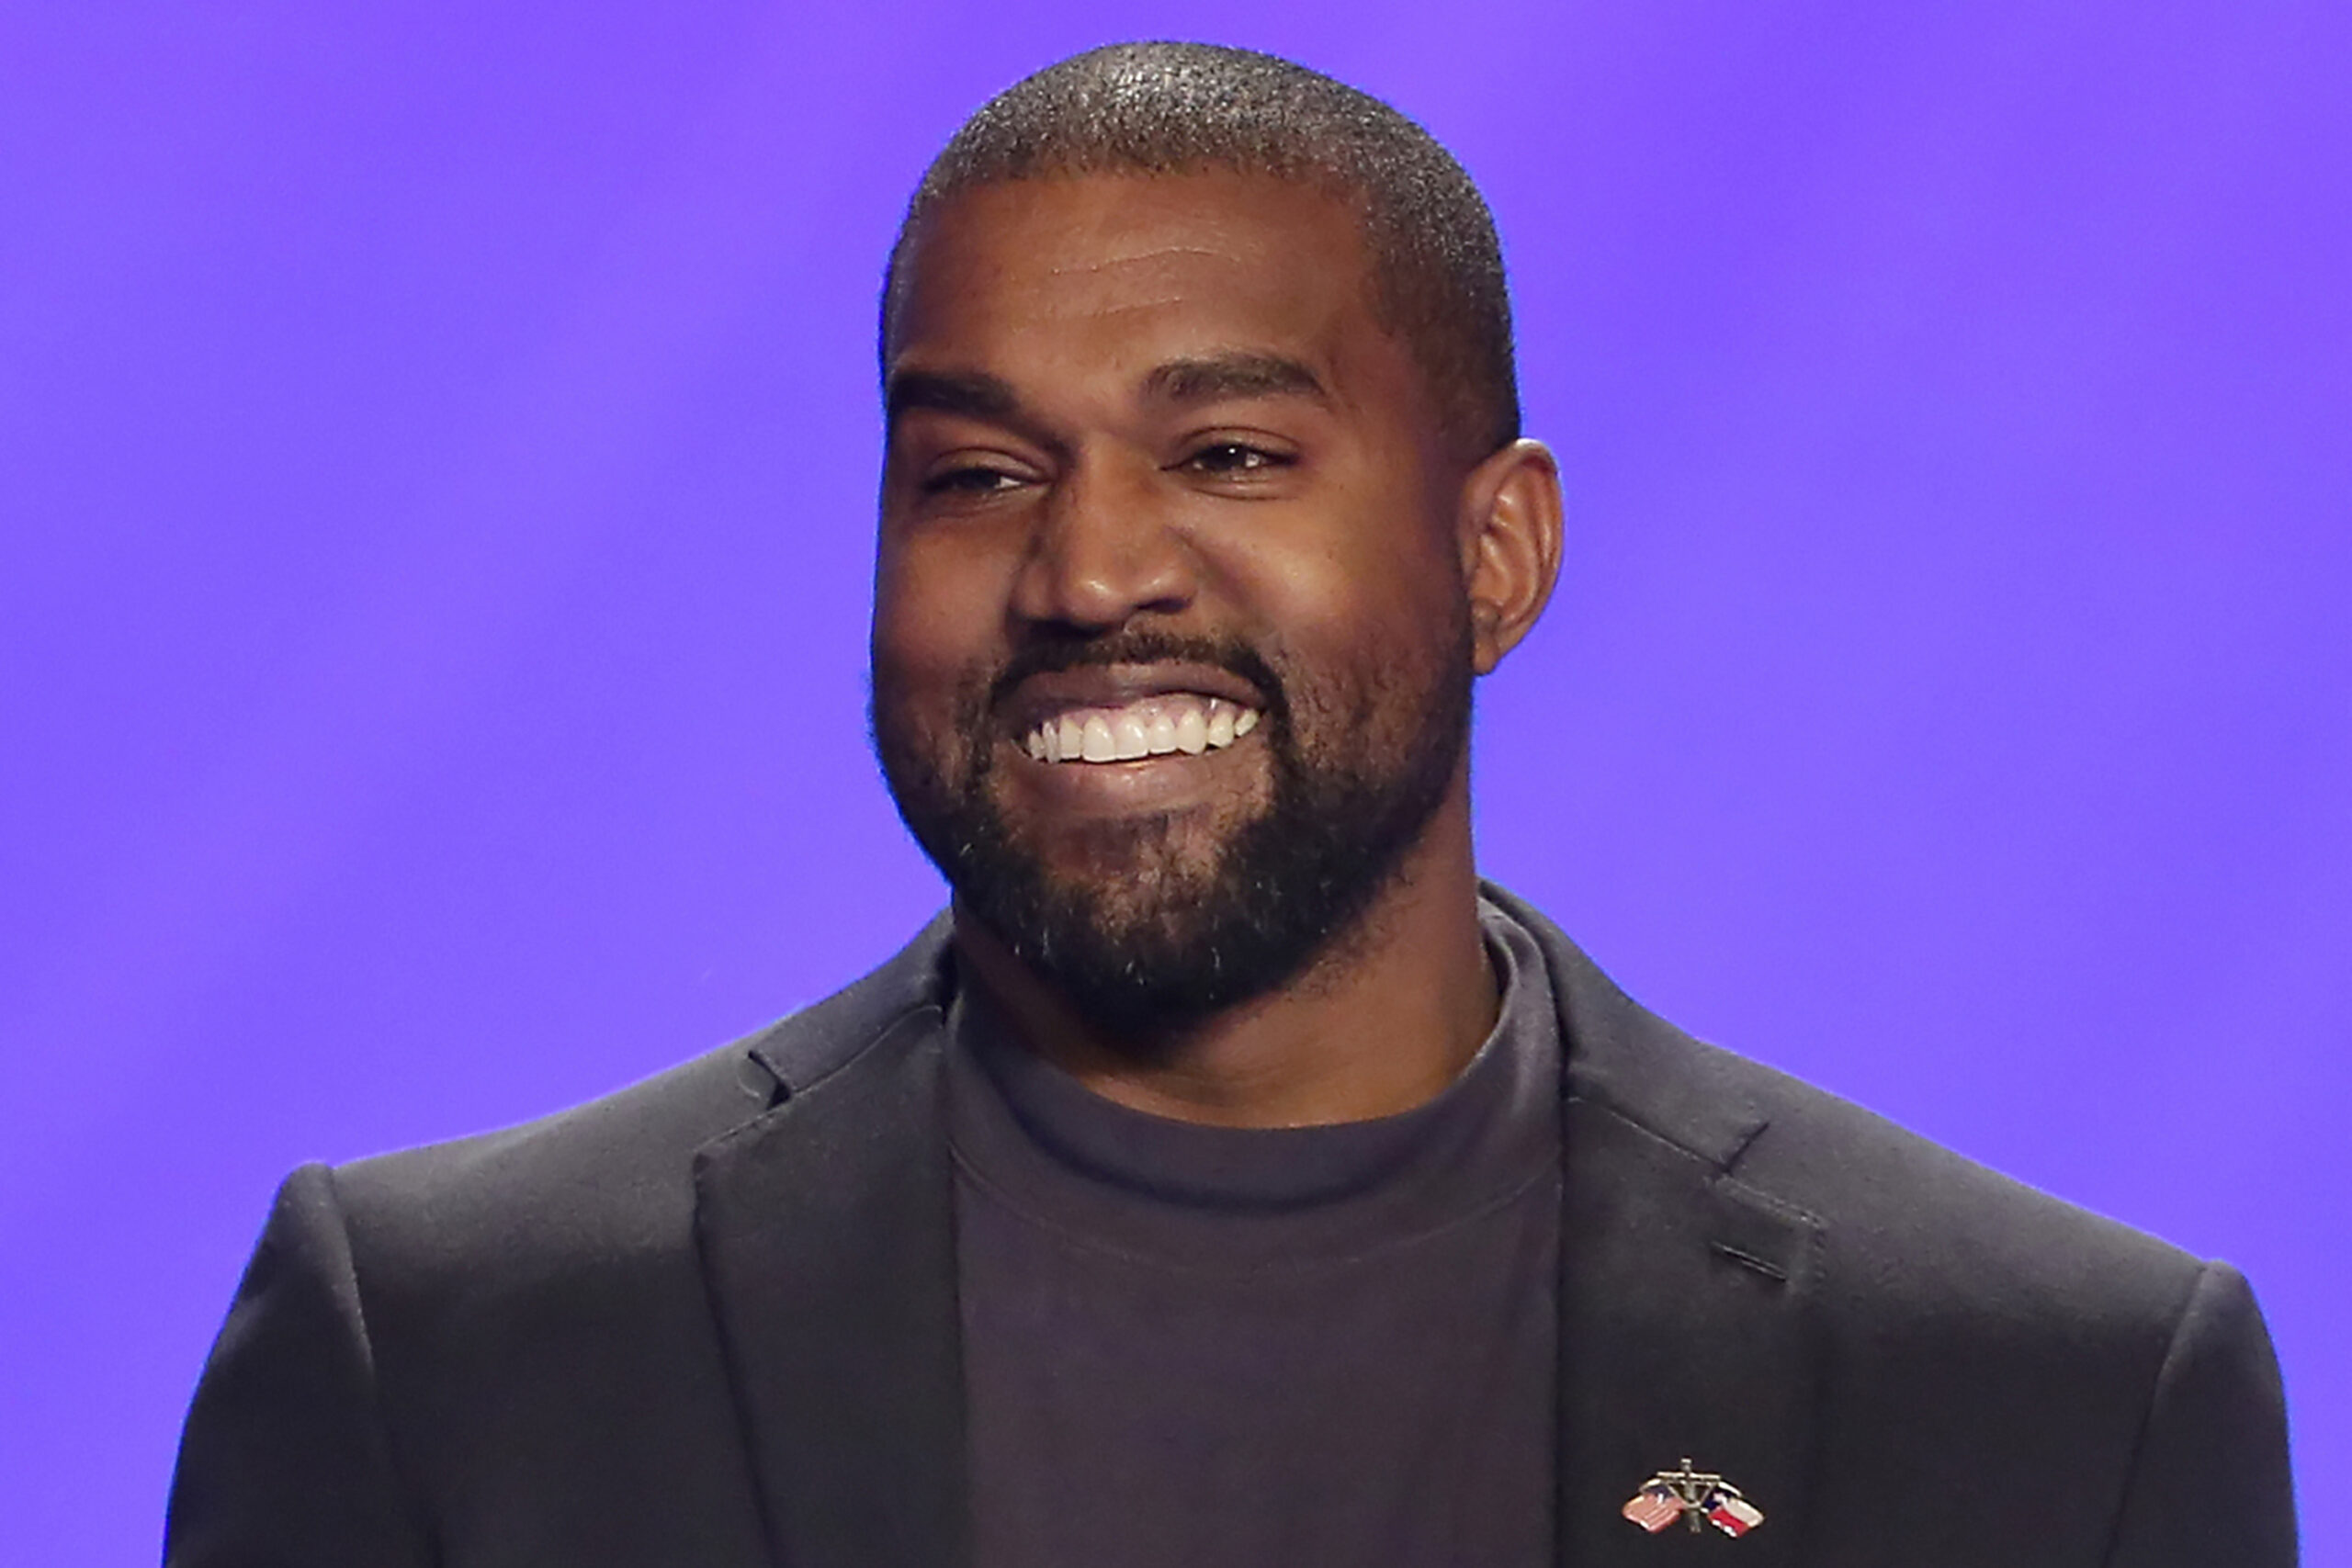 KANYE WEST WILL NOT BE CHARGED FOR THE INCIDENT OF THE TAKEN AND THROWN AWAY PHONE